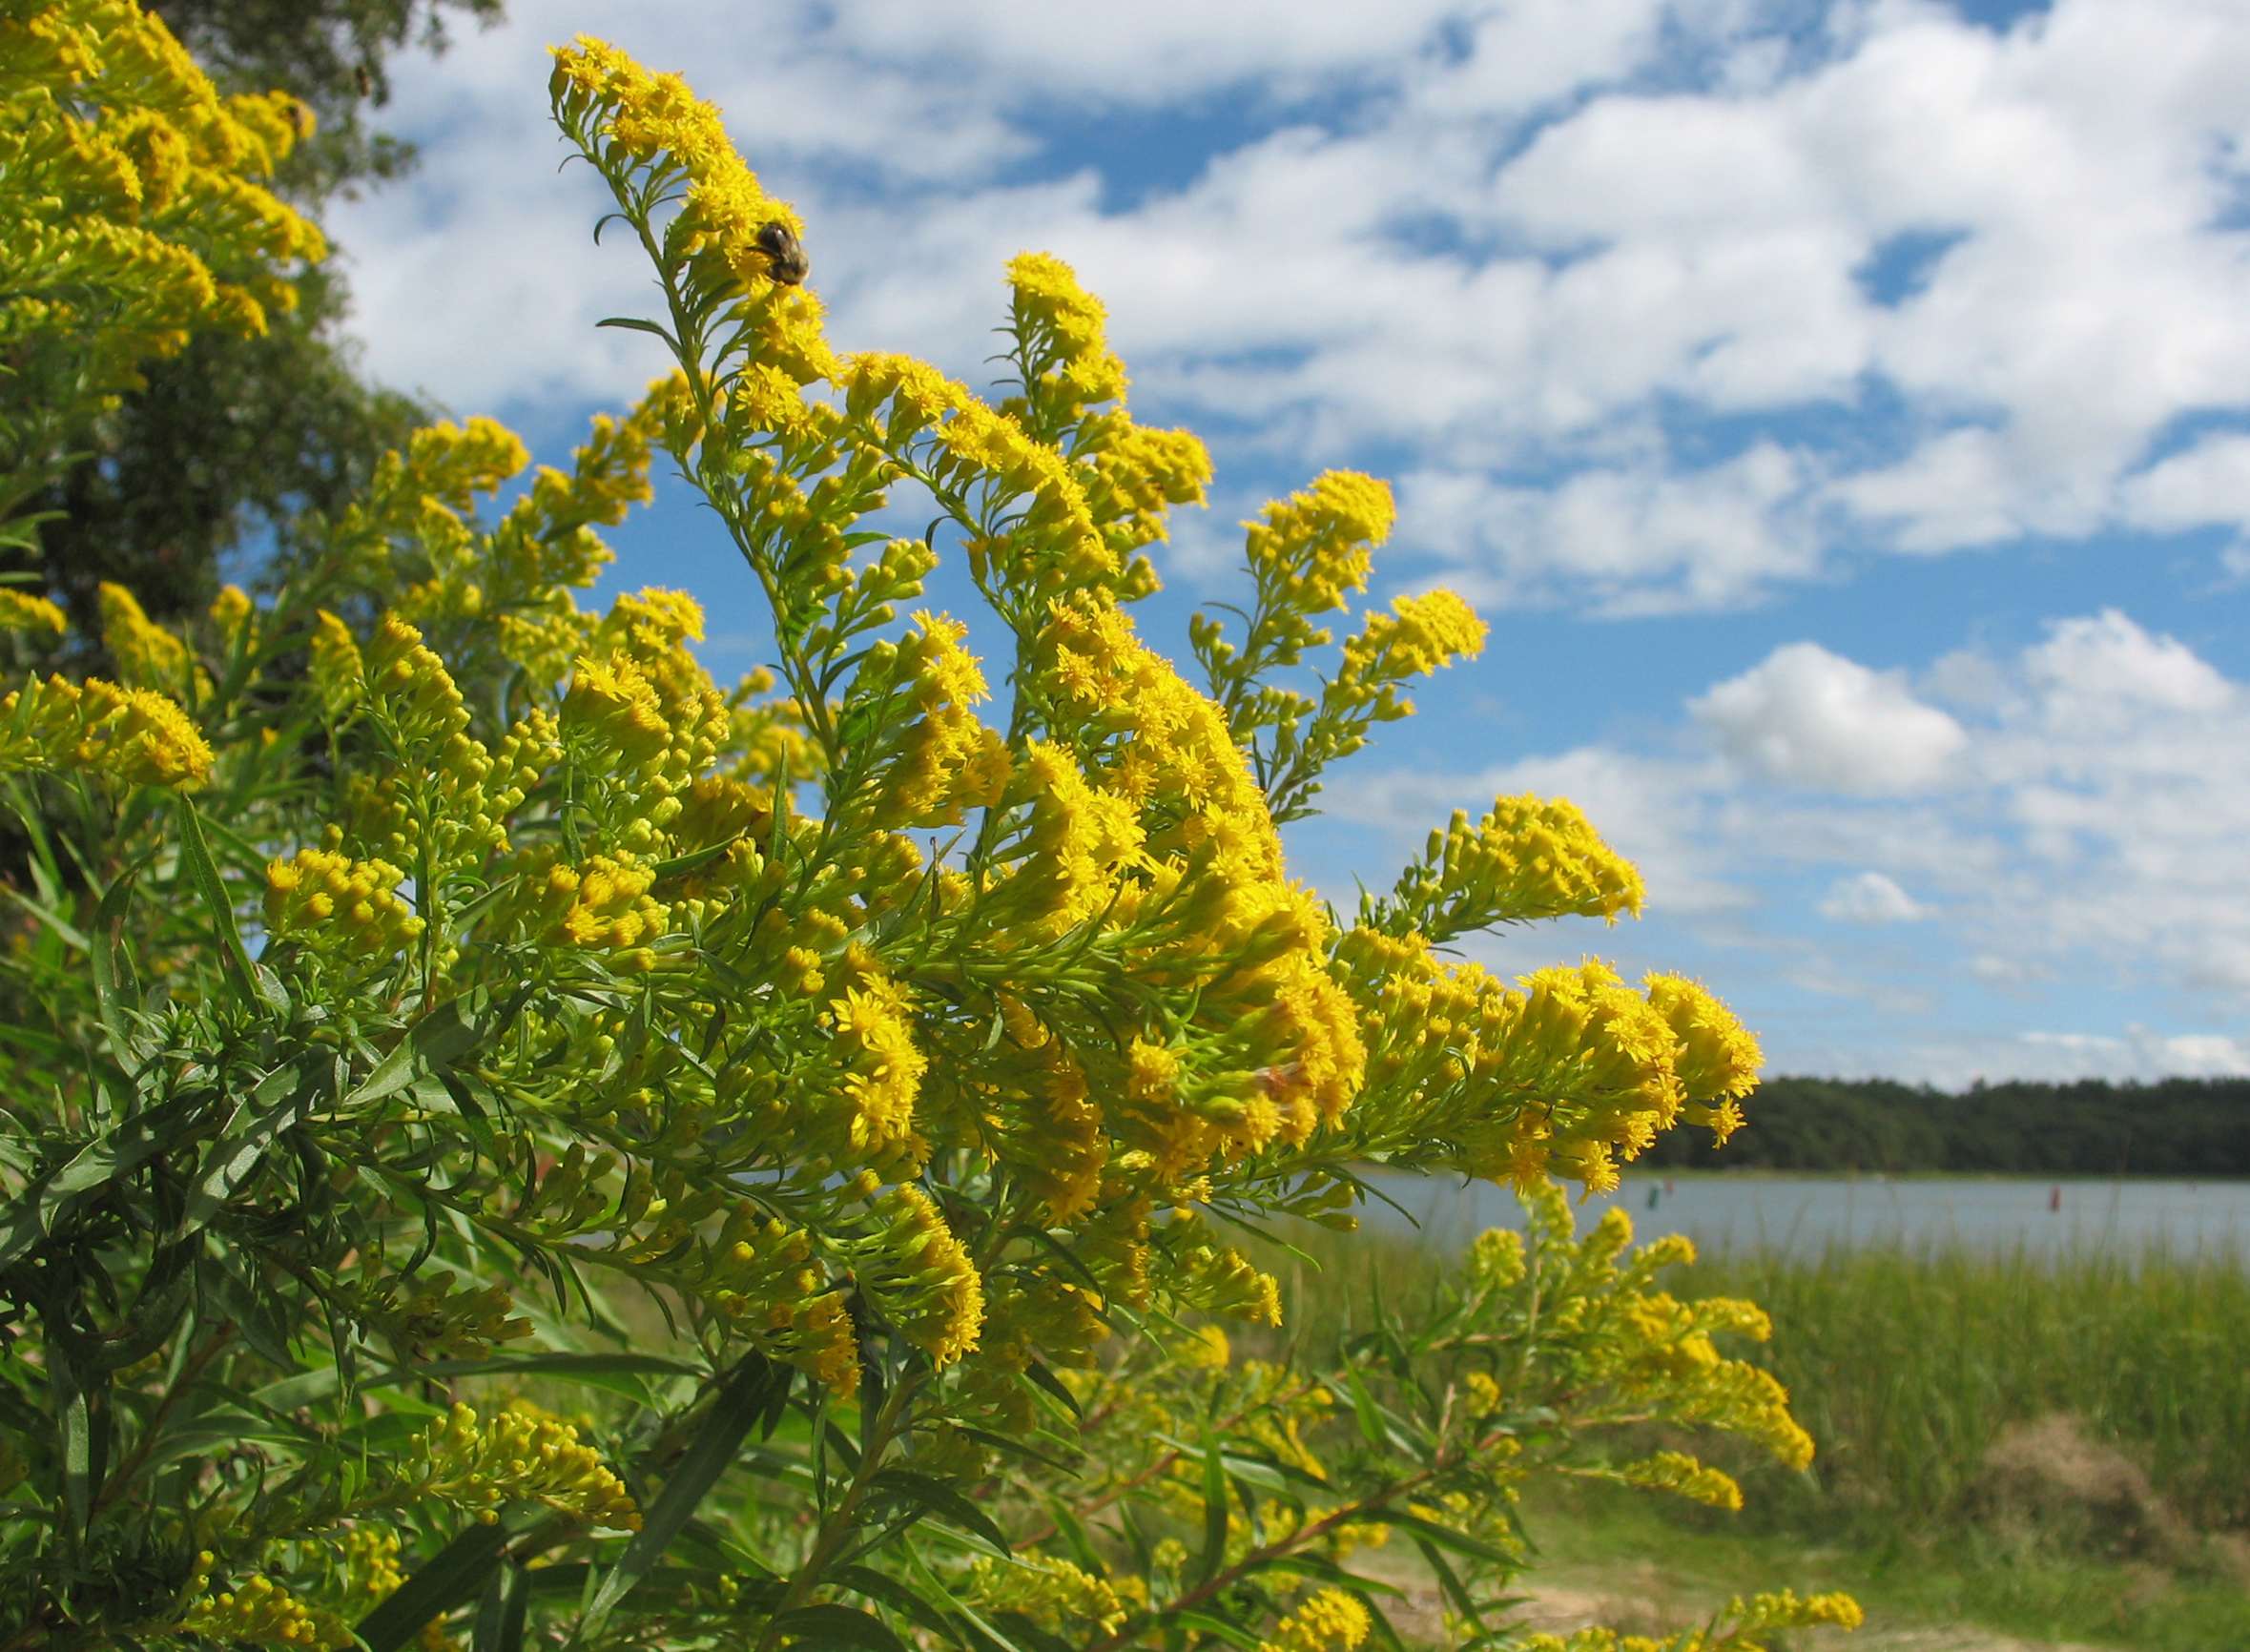 More Goldenrod on Little Buttermilk Bay (user submitted)